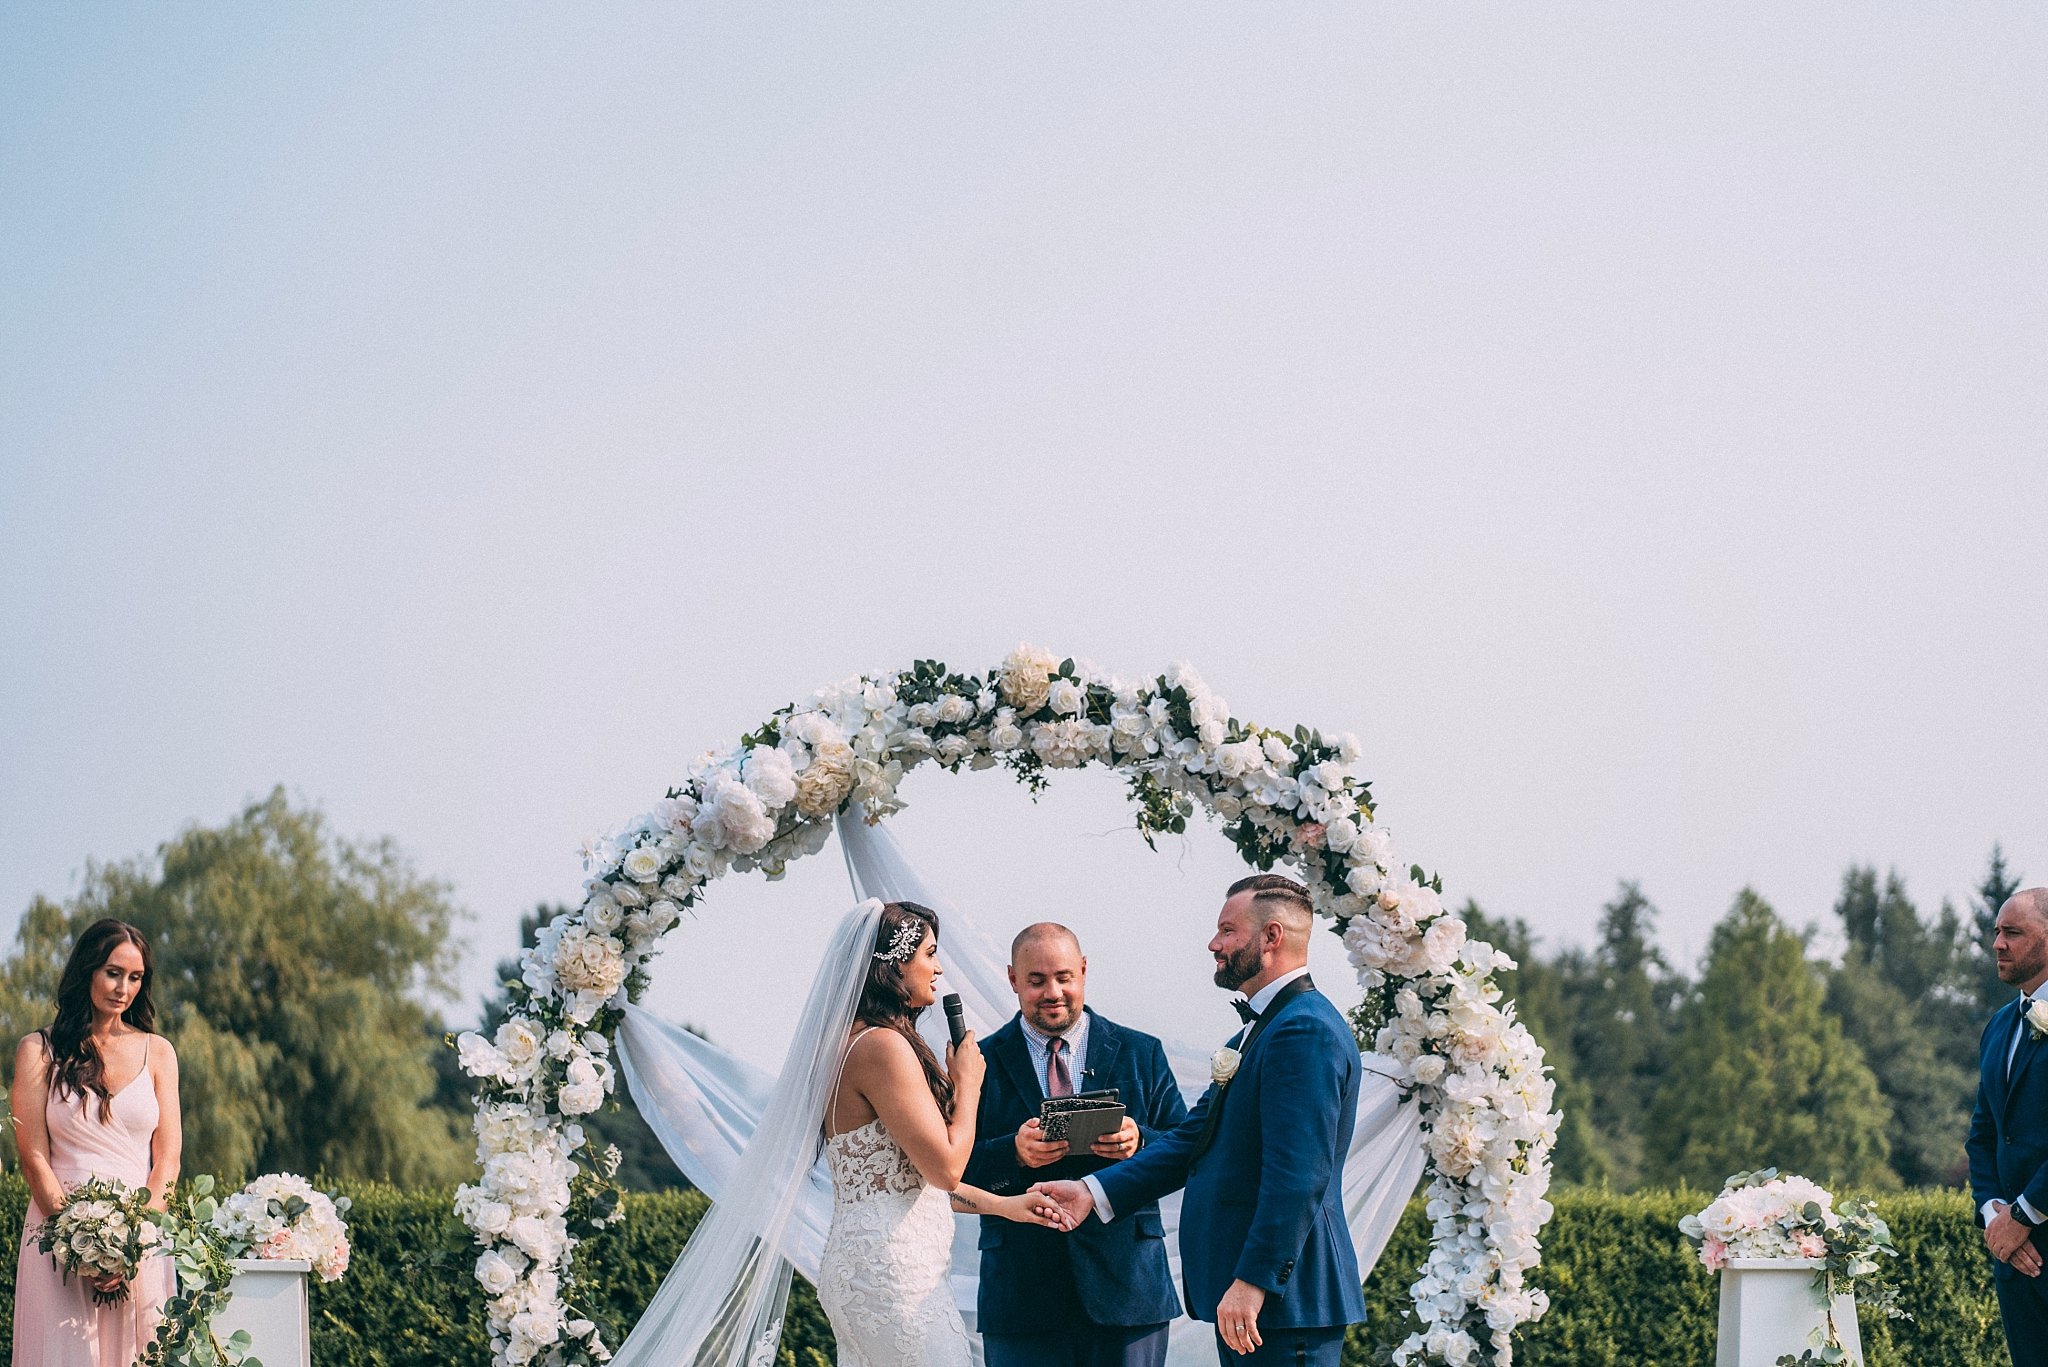 bride reading vows to groom during wedding ceremony under floral arch